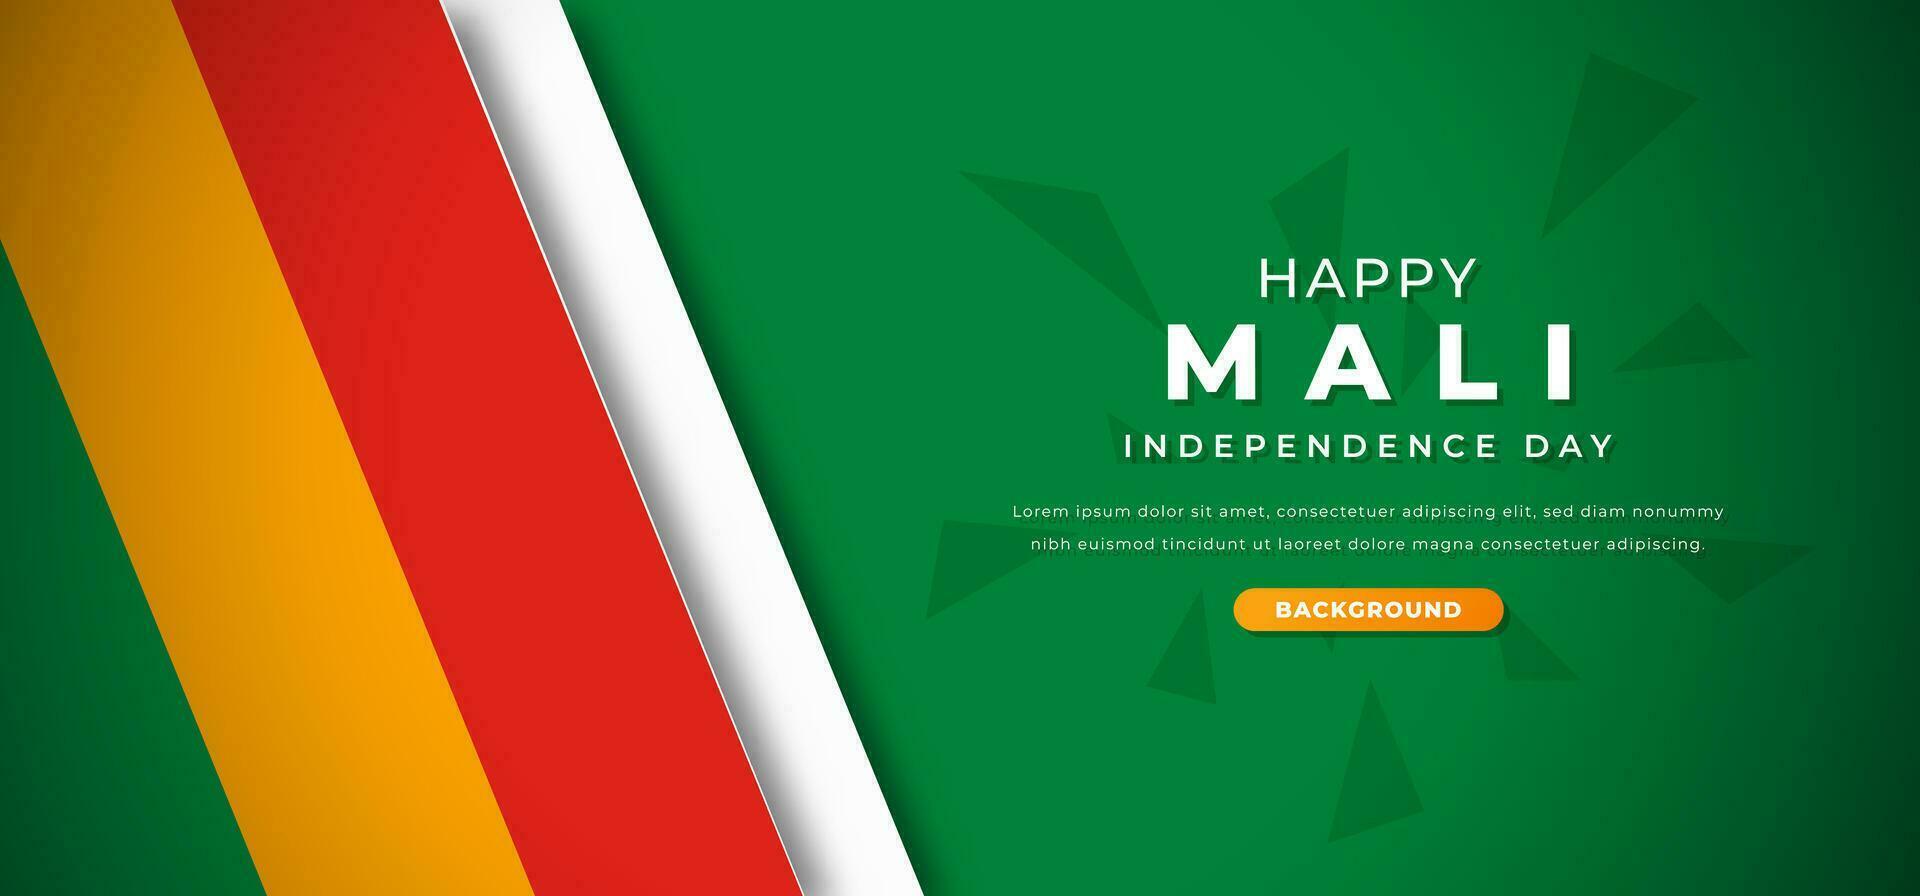 Happy Mali Independence Day Design Paper Cut Shapes Background Illustration for Poster, Banner, Advertising, Greeting Card vector